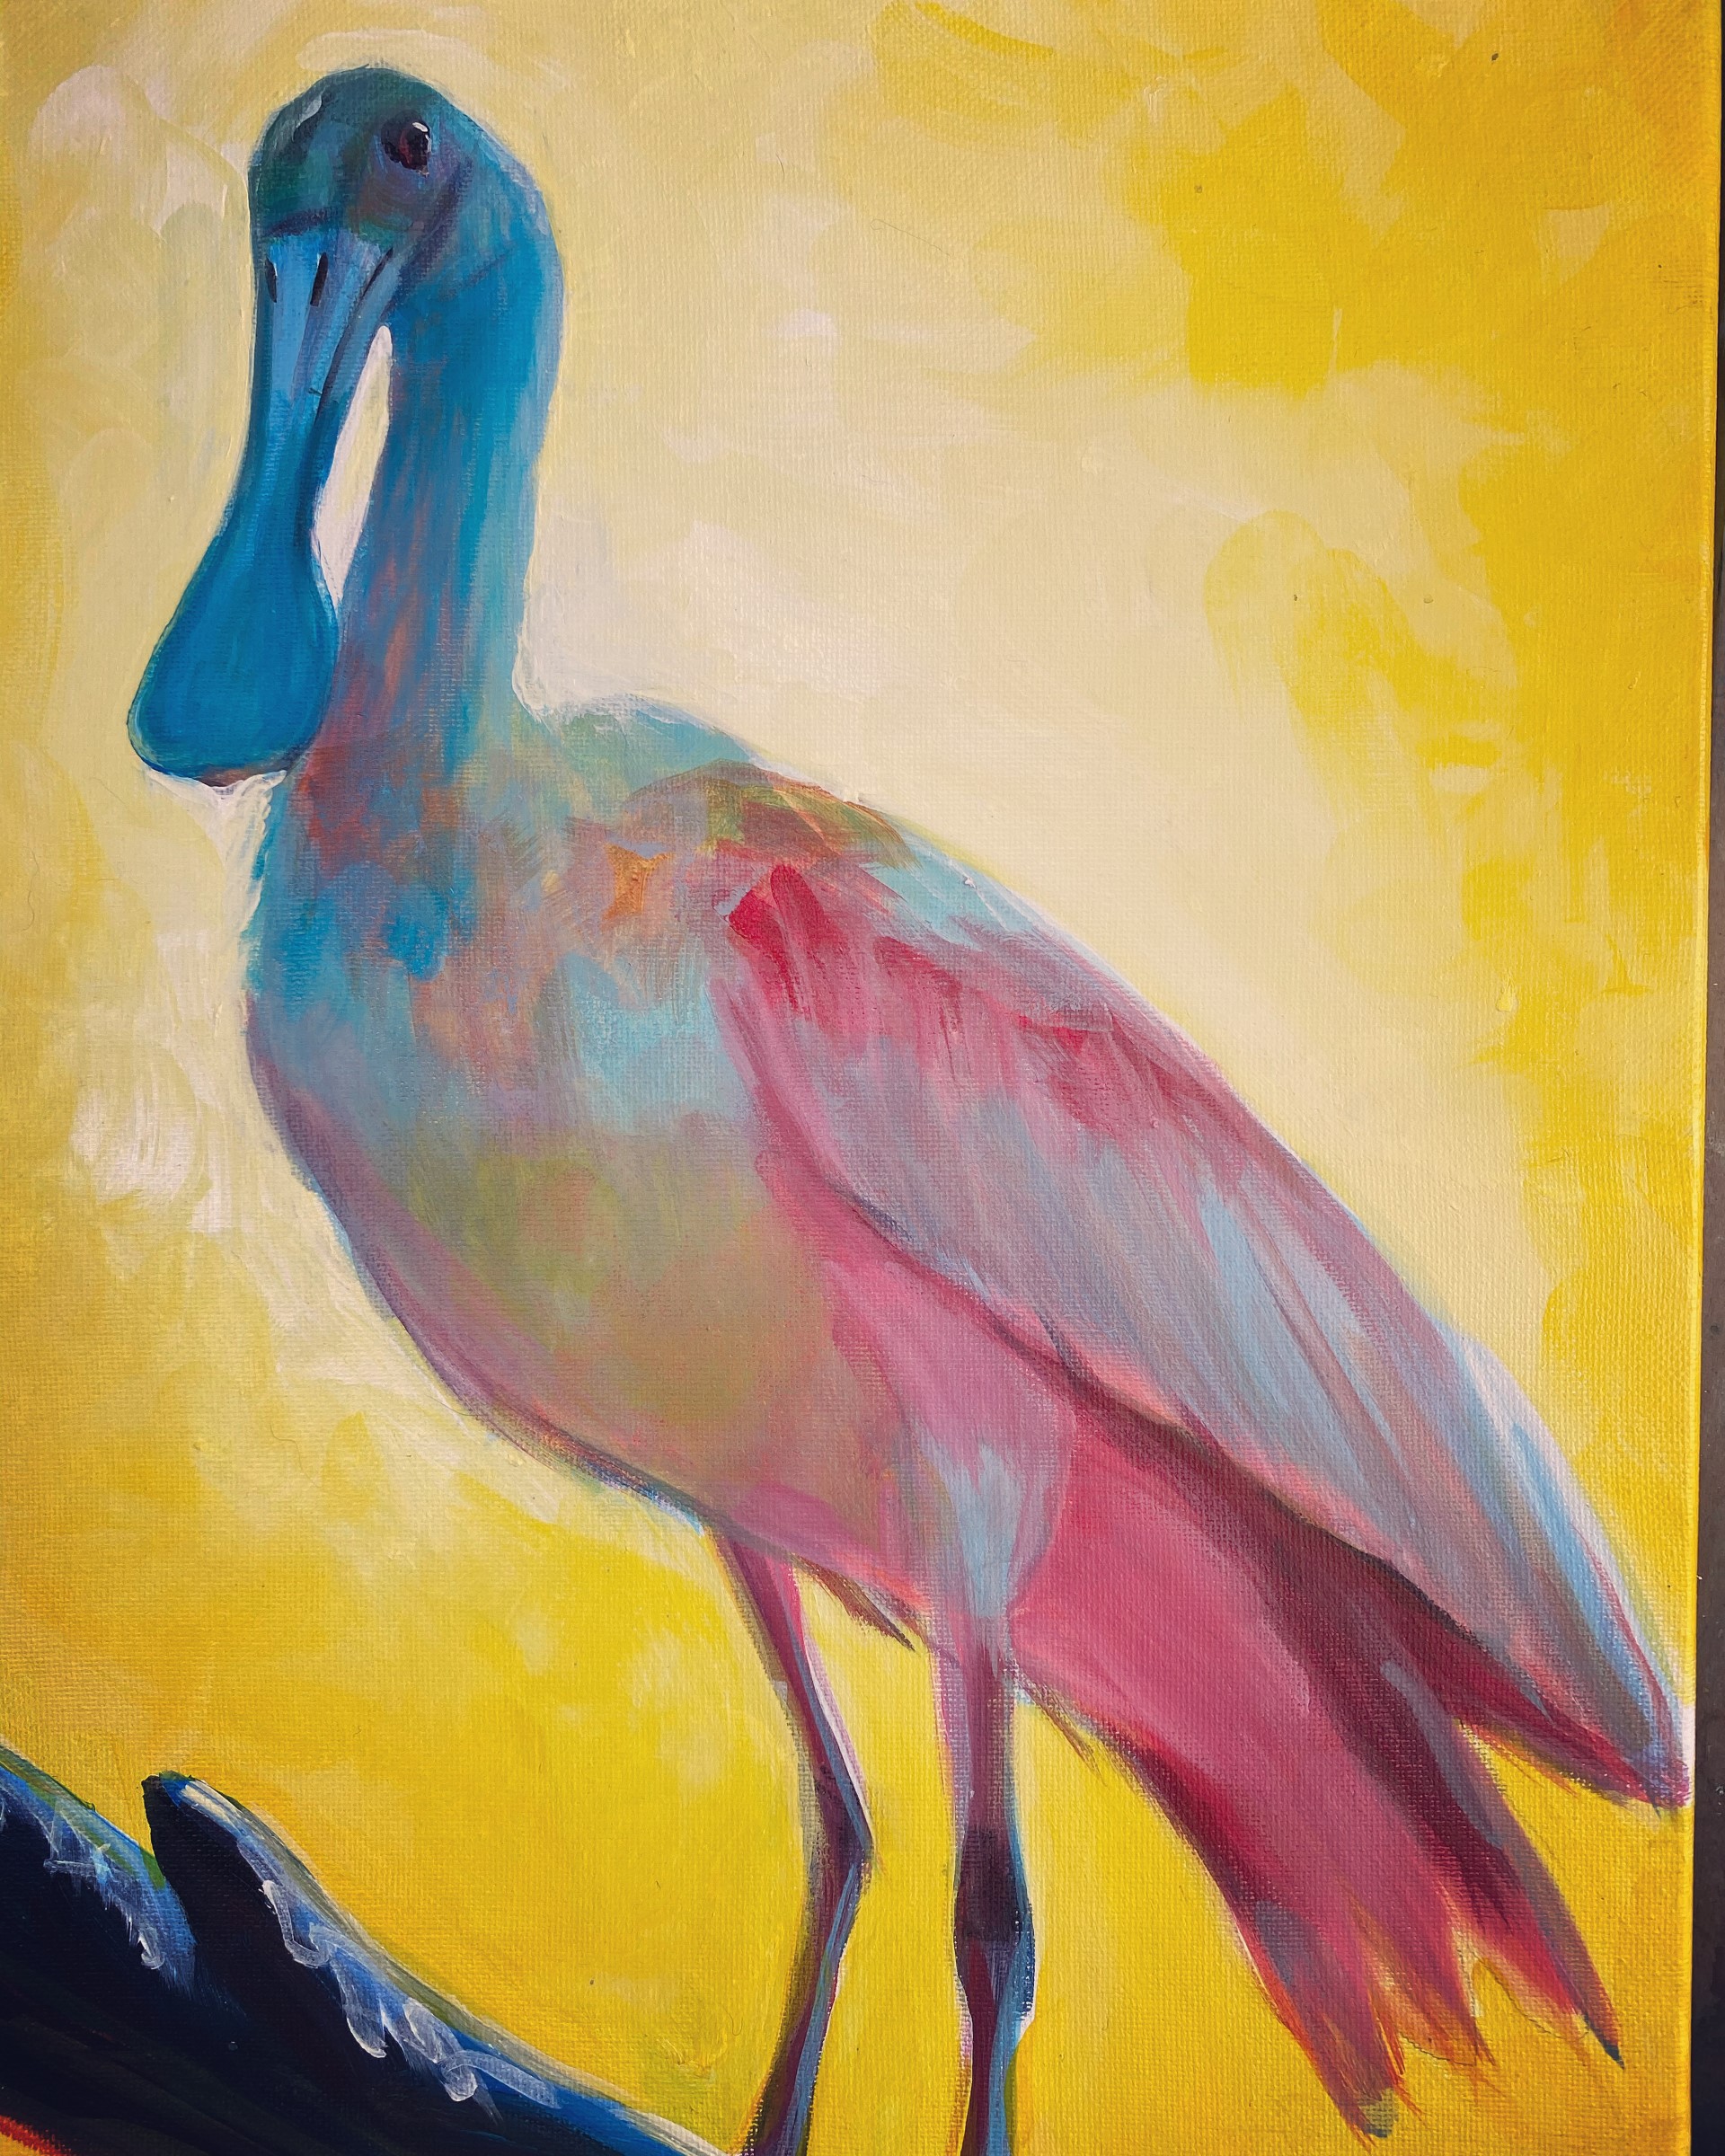 Colorful Painting of a Spoonbill Bird